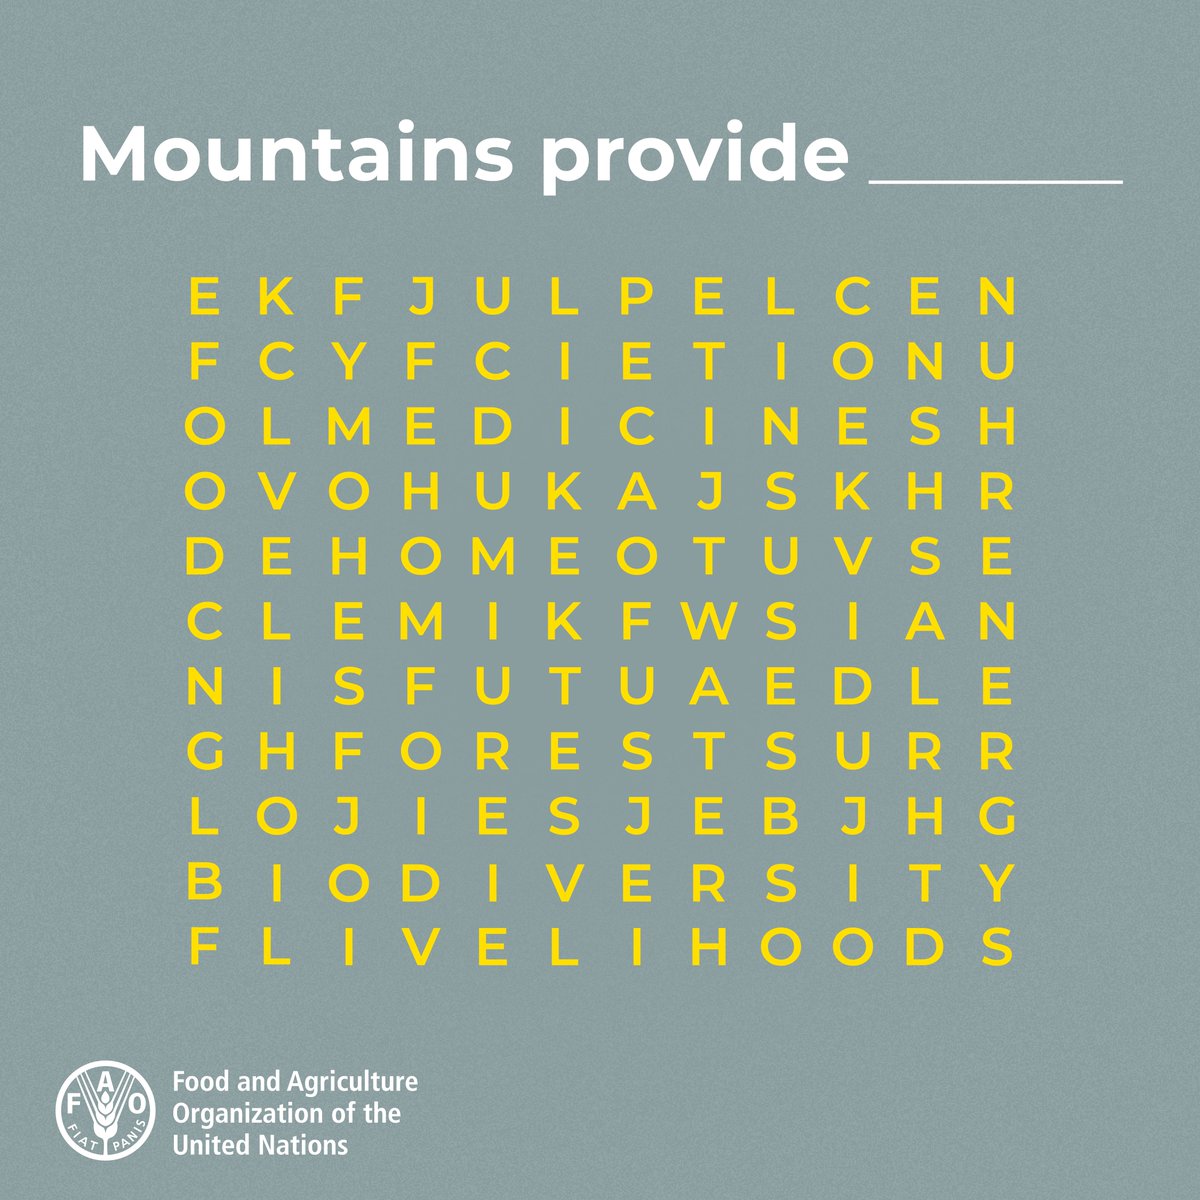 Mountains provide __________.  

Share the first 3 words you see in the comments below 👇

#MountainsMatter #IMD2023 #COP28